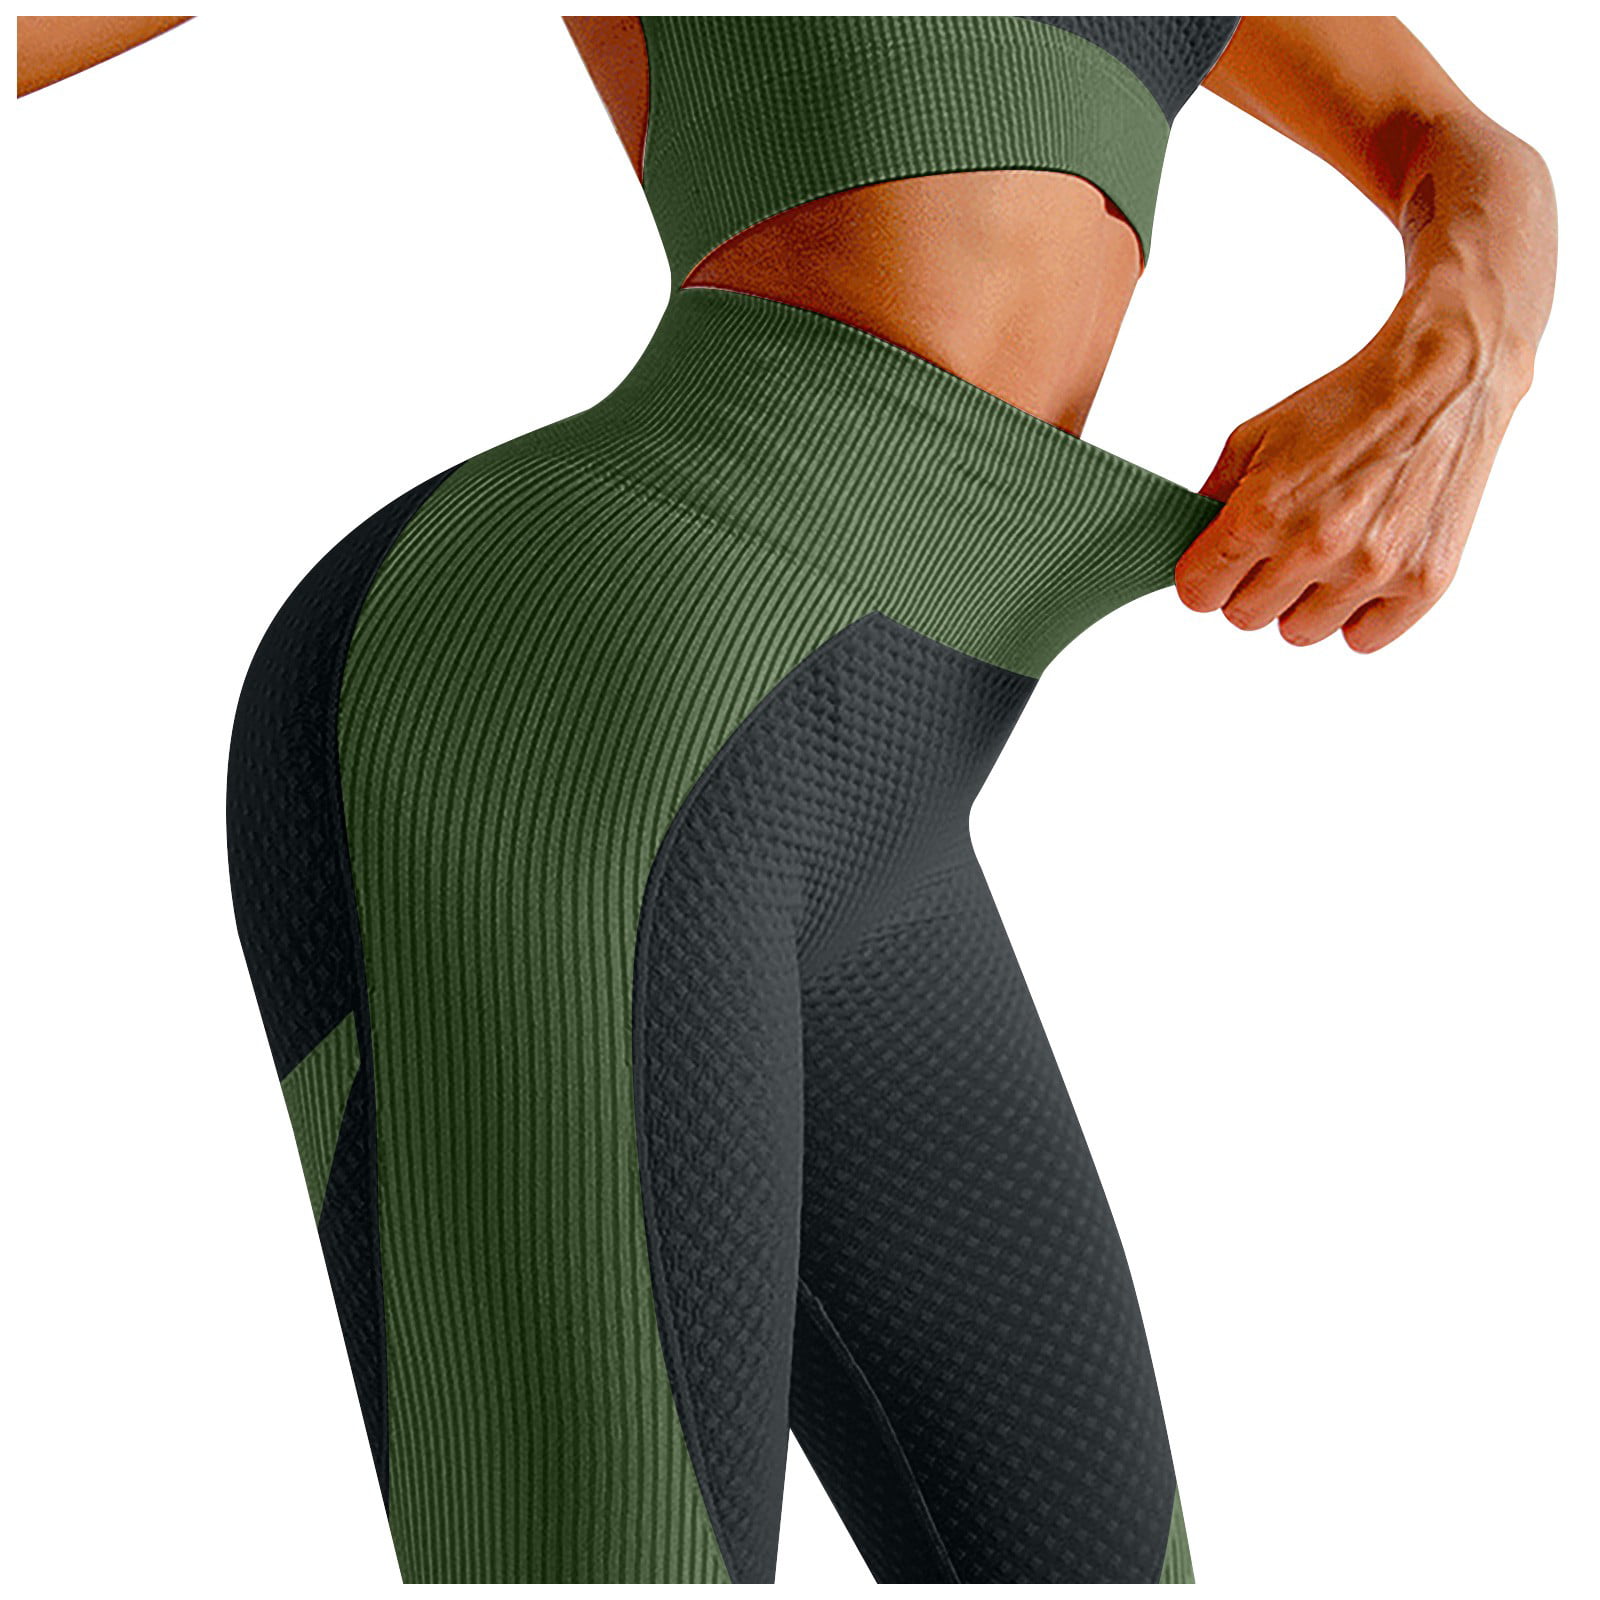 Yoga Pants for Women Stretch Leggings Fitness Running Sports Active with Pockets